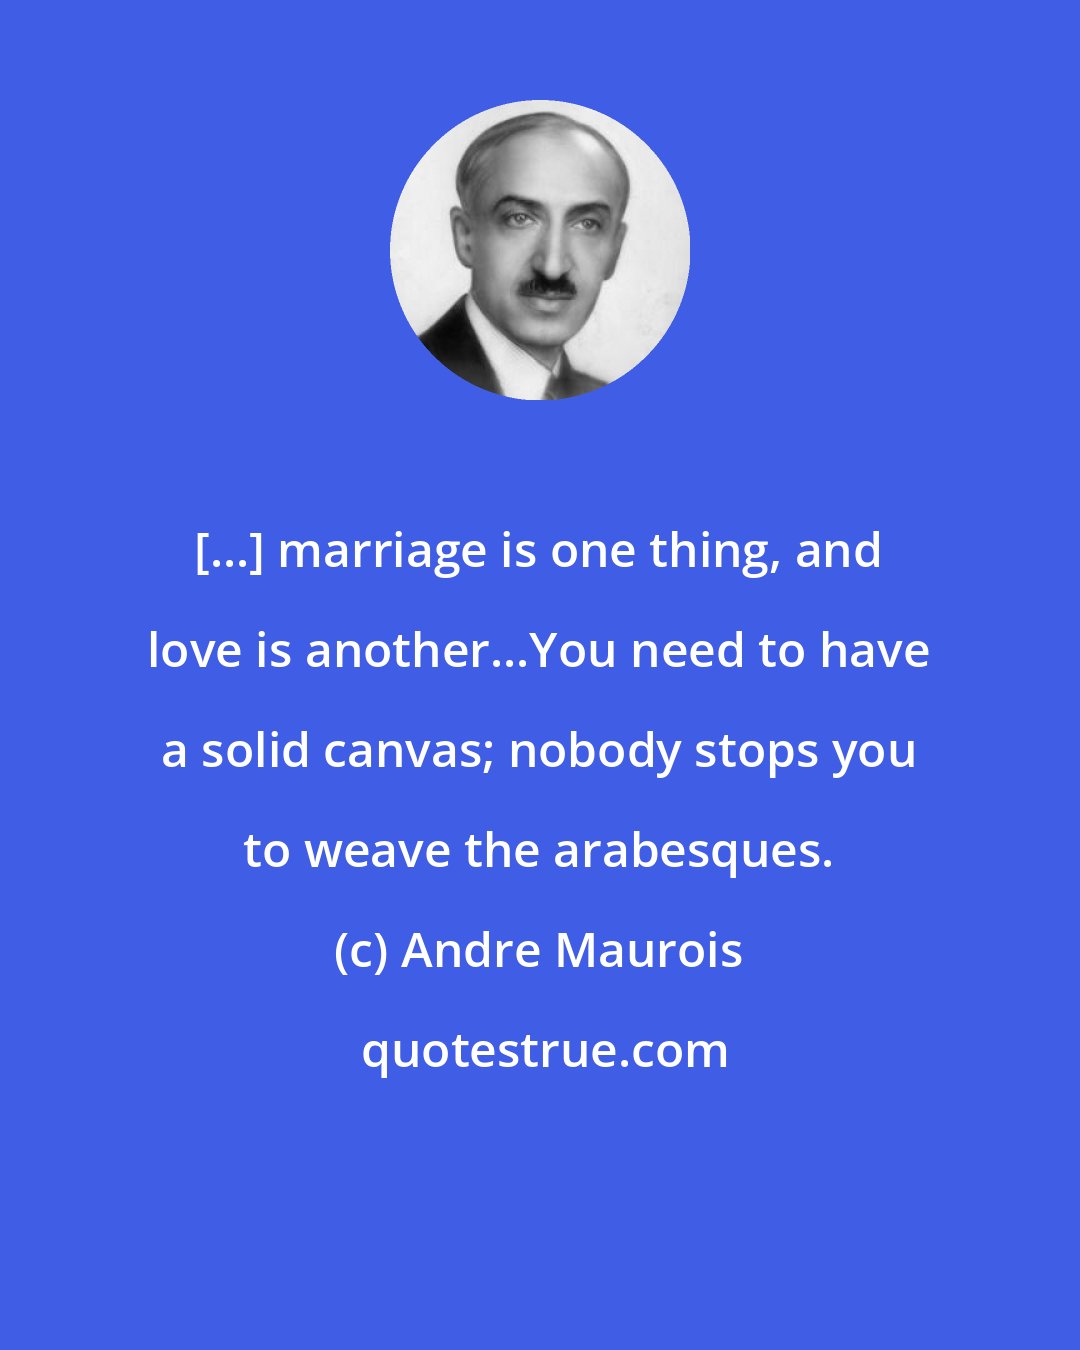 Andre Maurois: [...] marriage is one thing, and love is another...You need to have a solid canvas; nobody stops you to weave the arabesques.